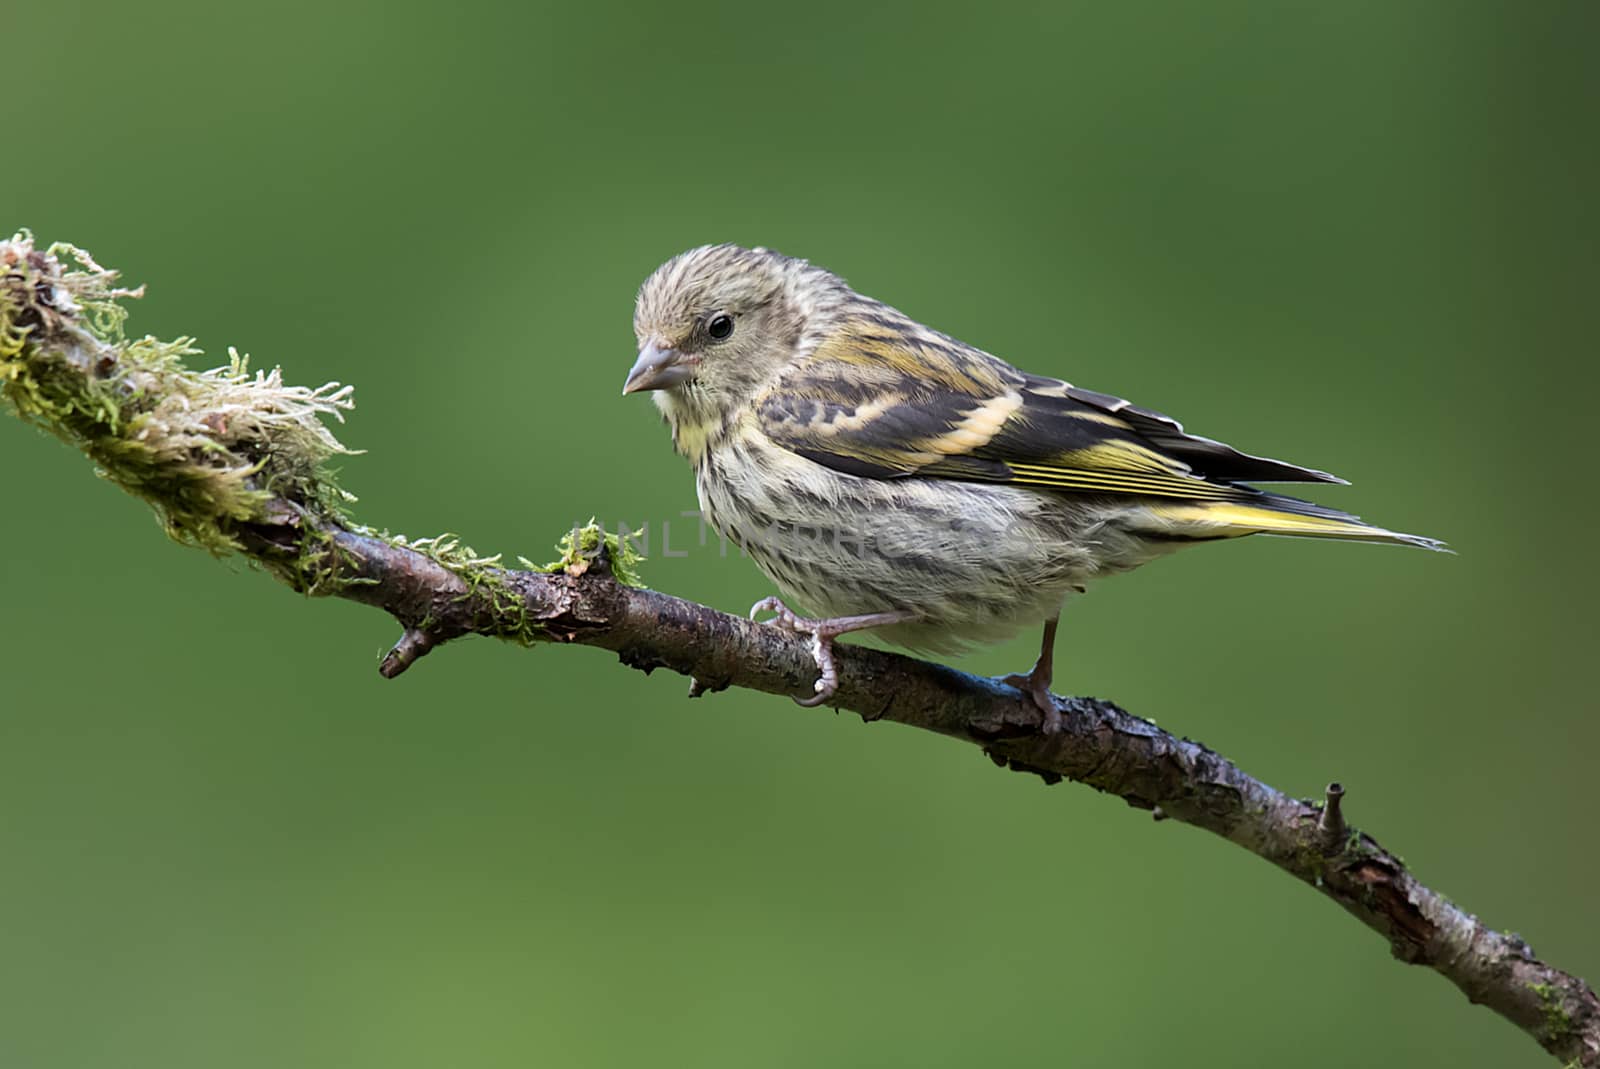 A female siskin sit on a branch looking slightly down to the left